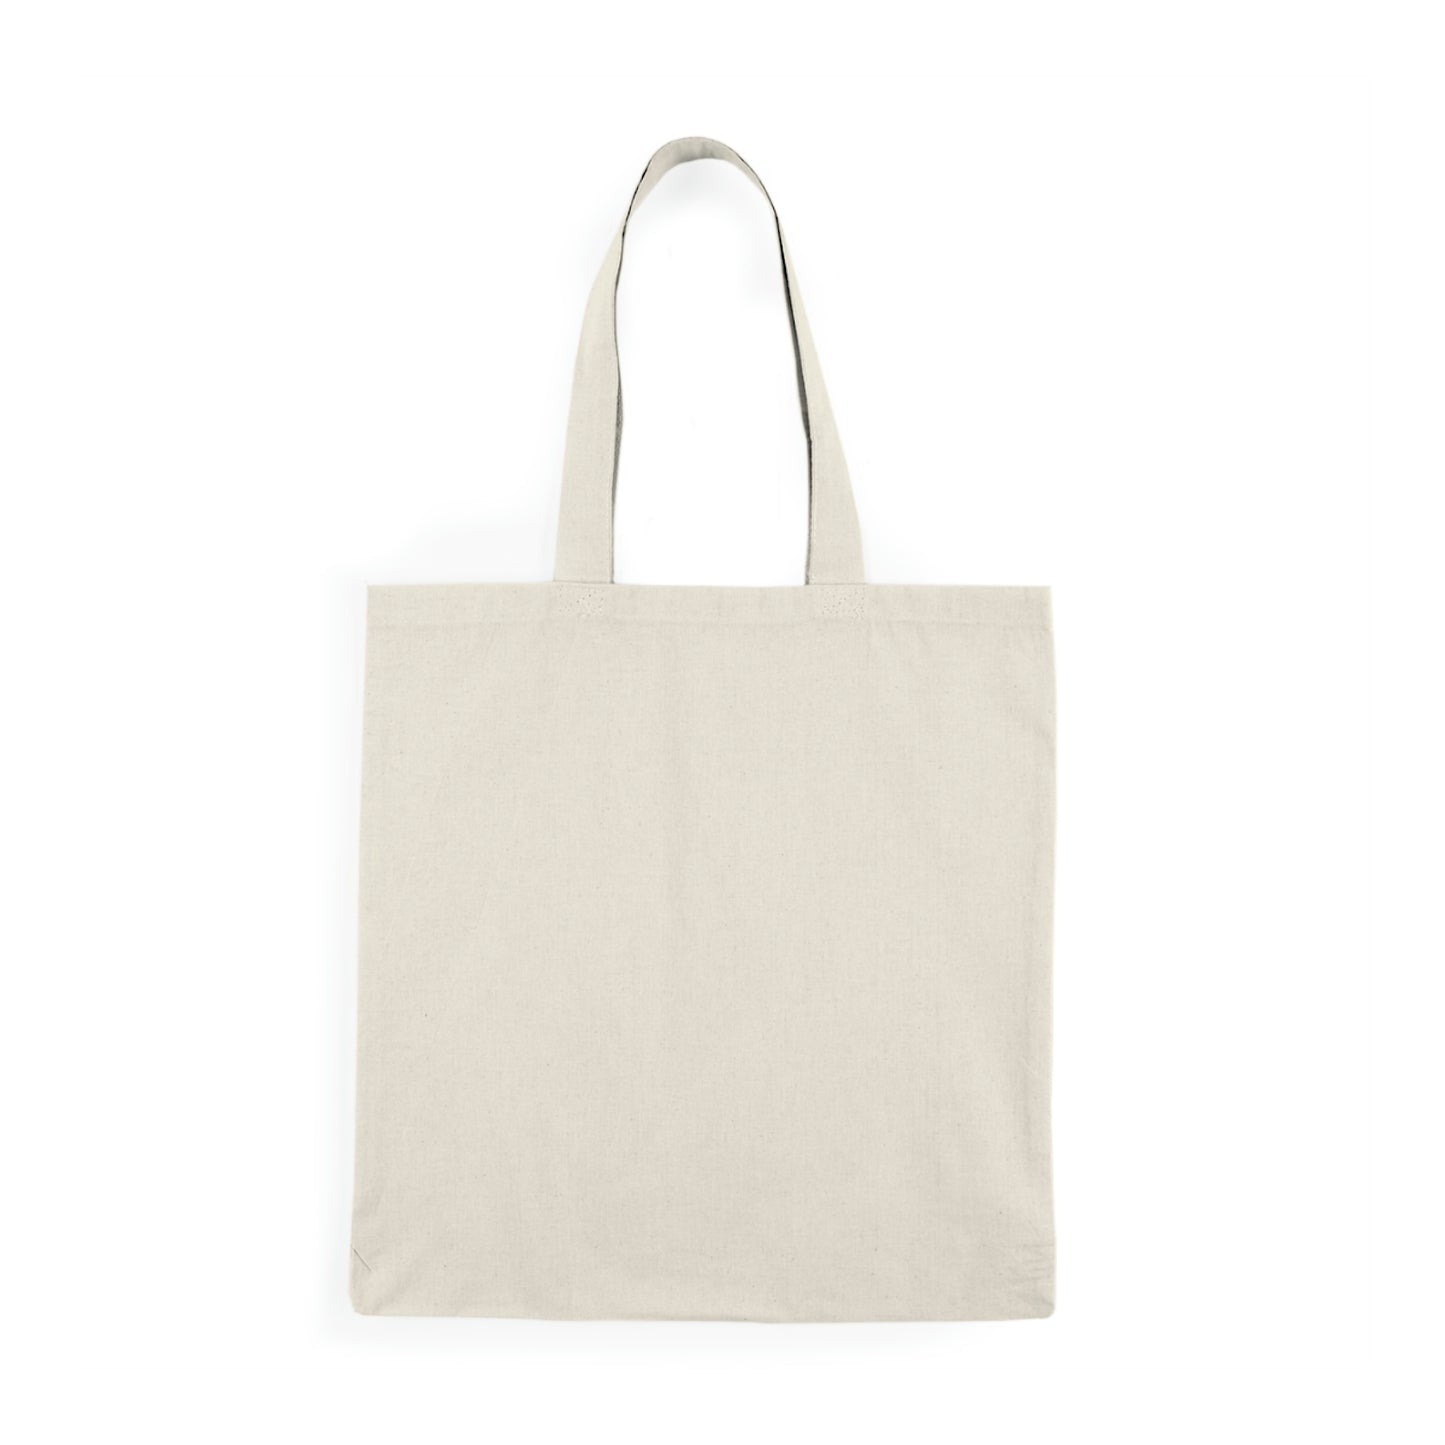 Murder In Lima - Natural Tote Bag